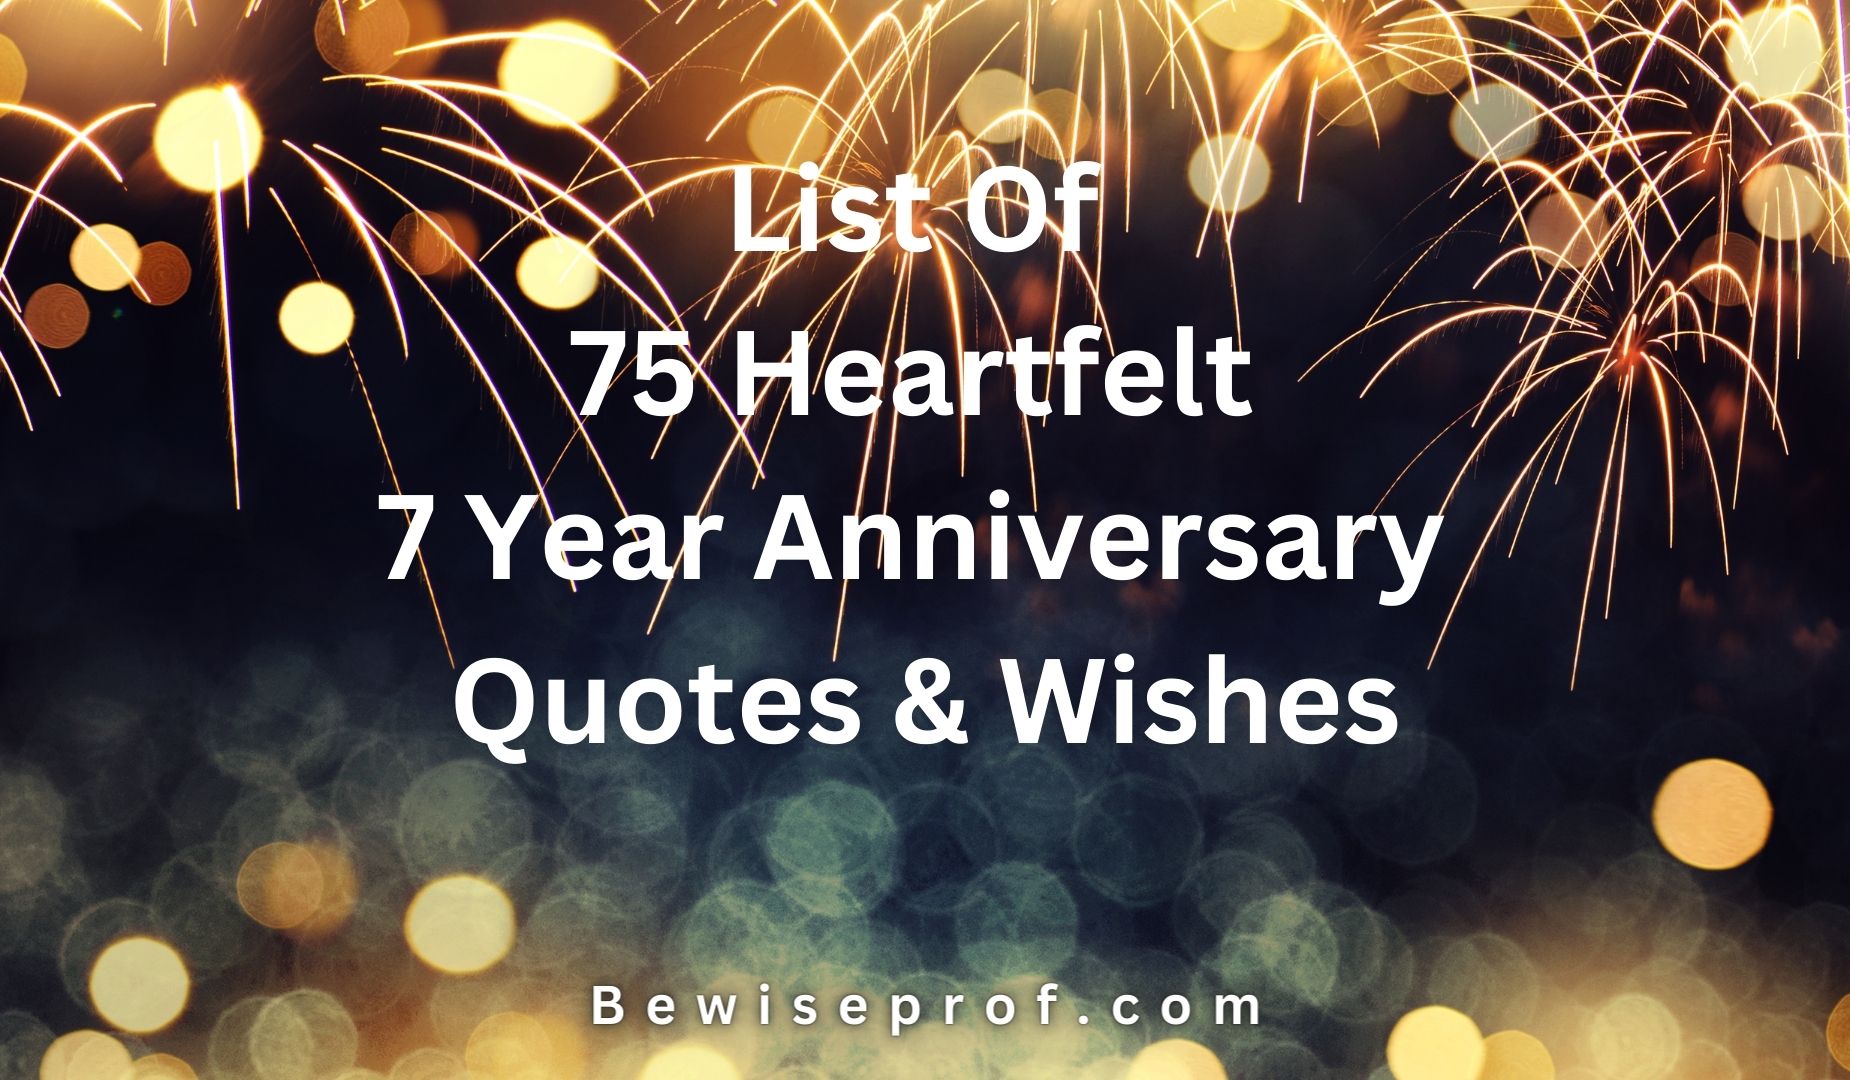 List Of 75 Heartfelt 7 Year Anniversary Quotes And Wishes